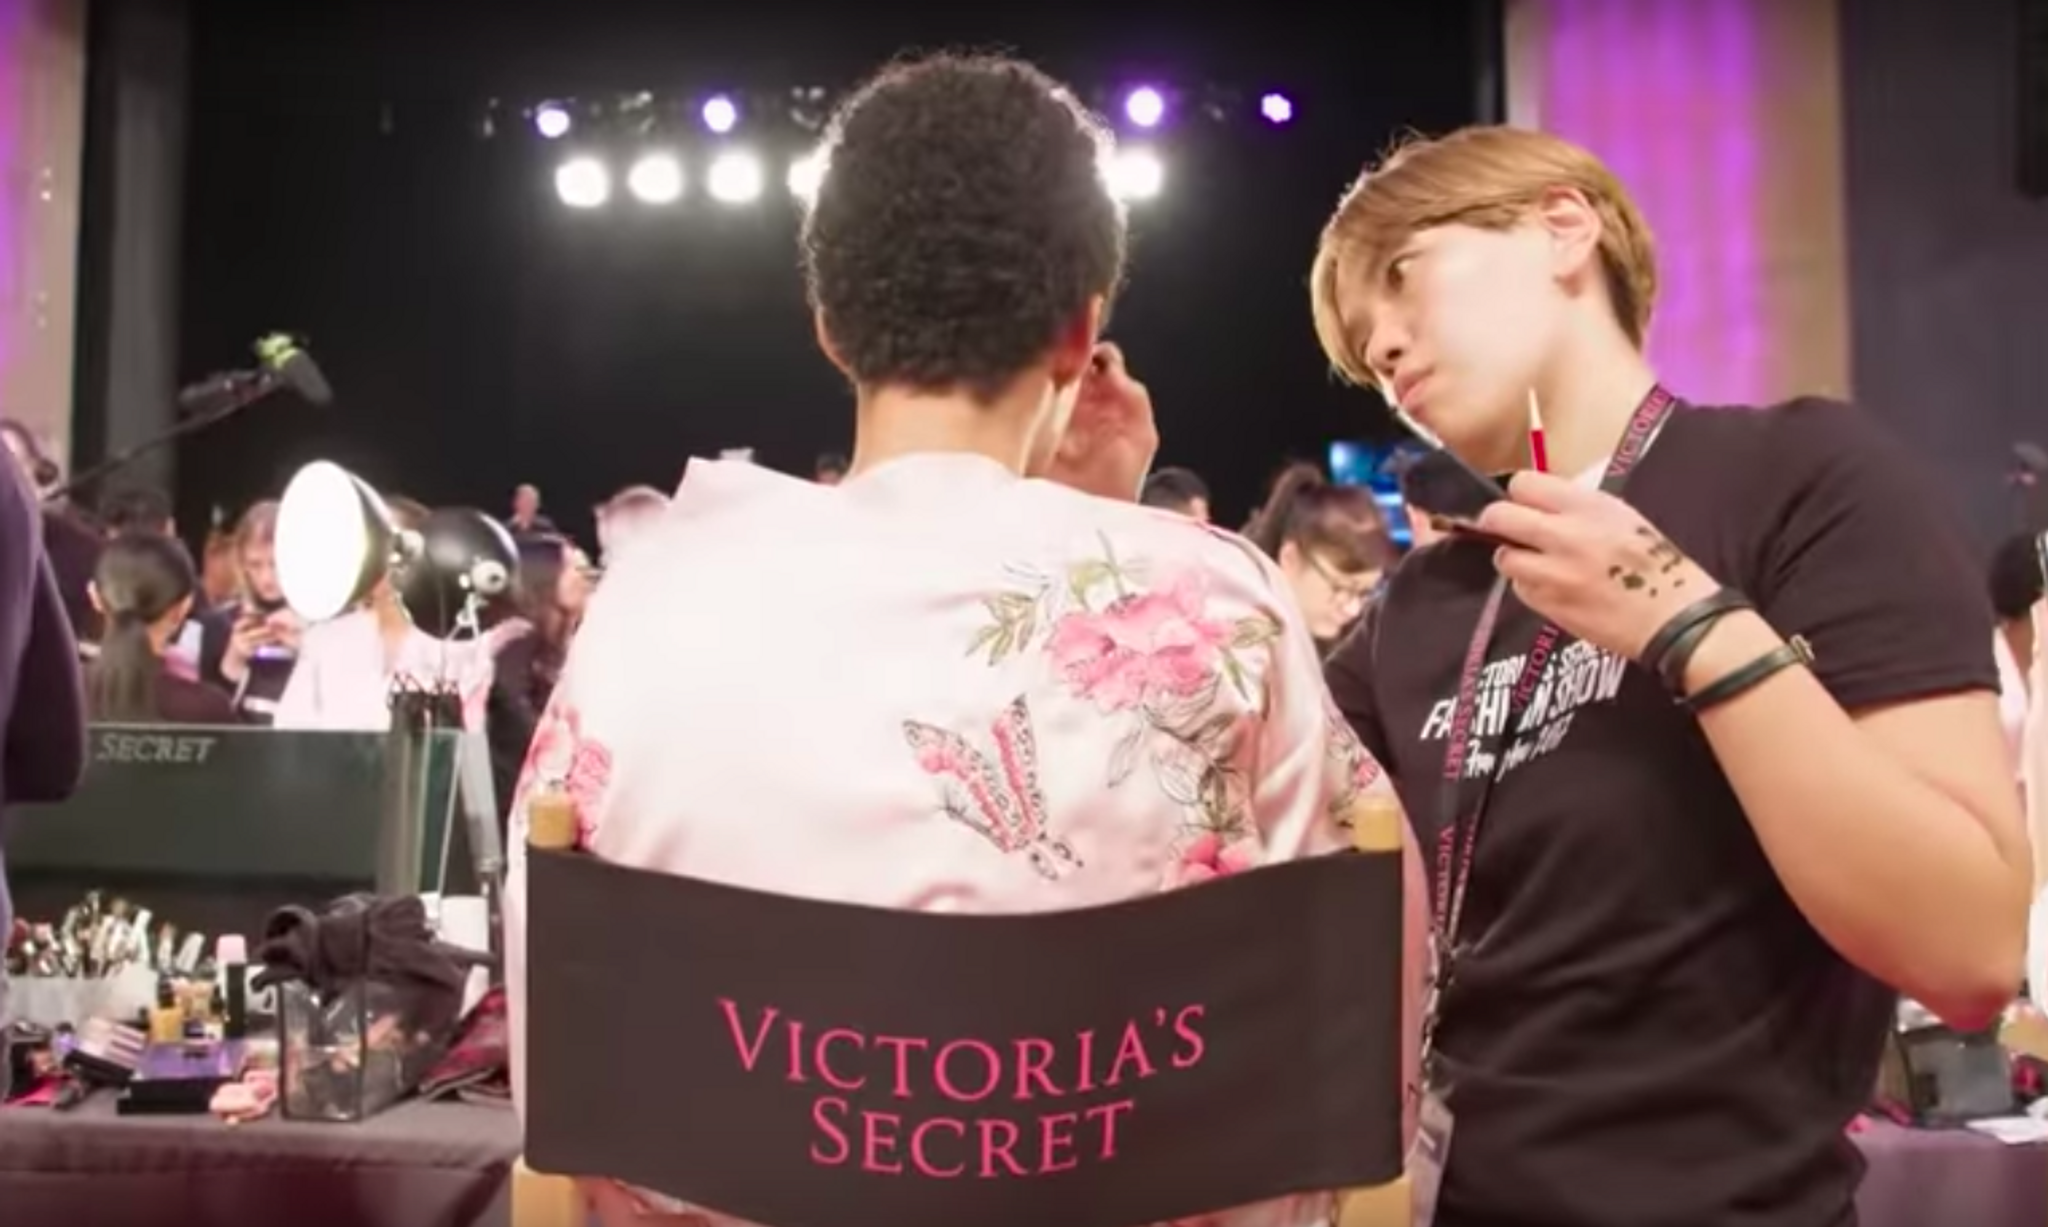 Victoria’s Secret axes show amid objectification claims